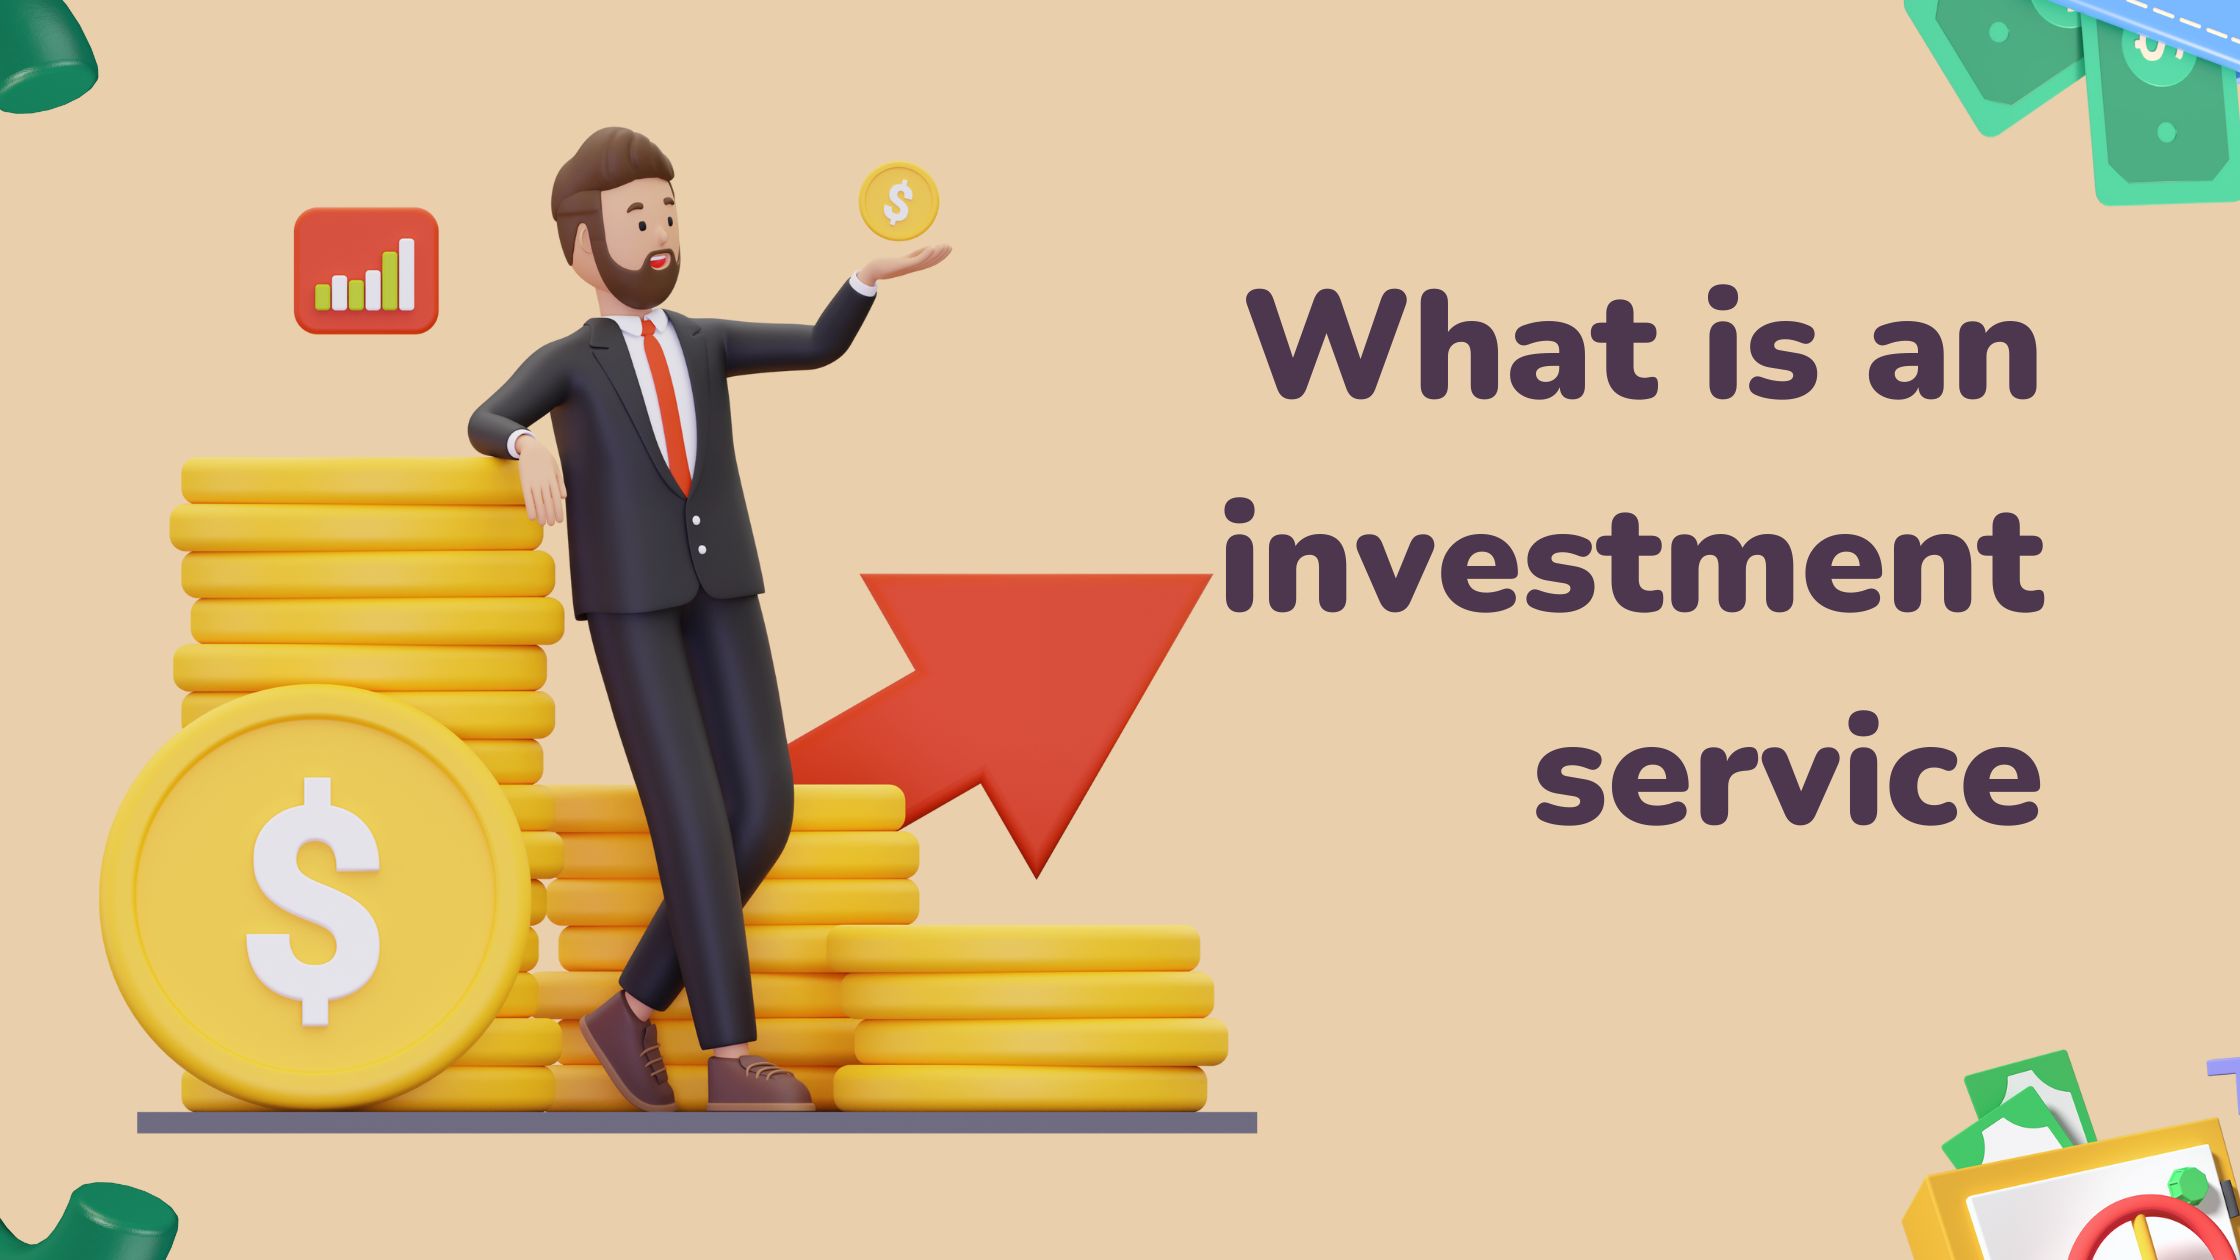 What is an investment service